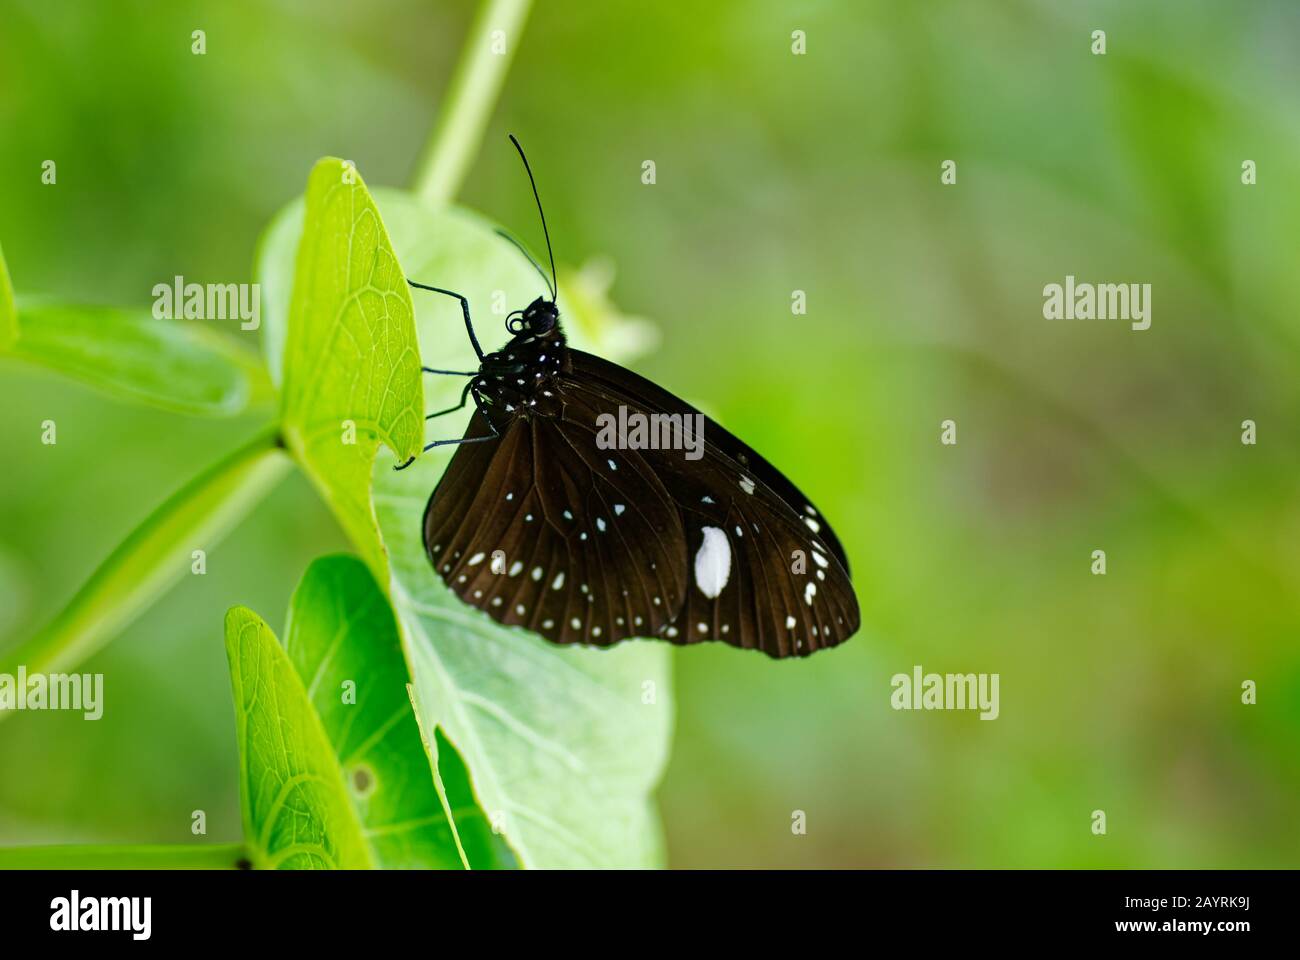 A black and white butterfly in Niue, the Common Crow Butterfly Stock Photo